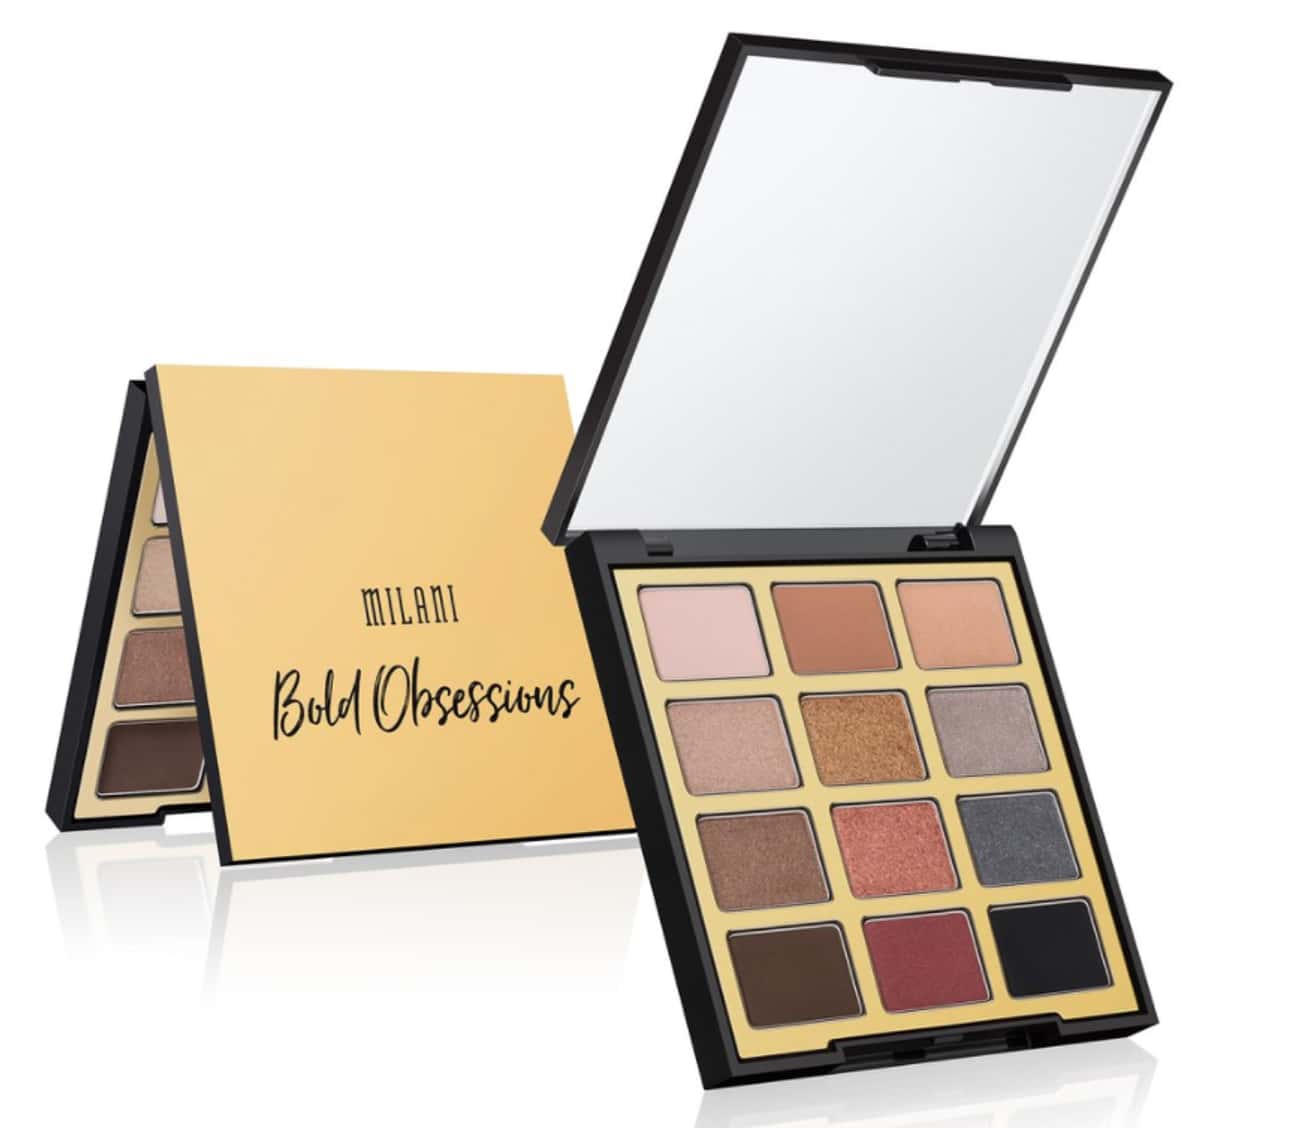 Bold Obsessions Palette By Milani